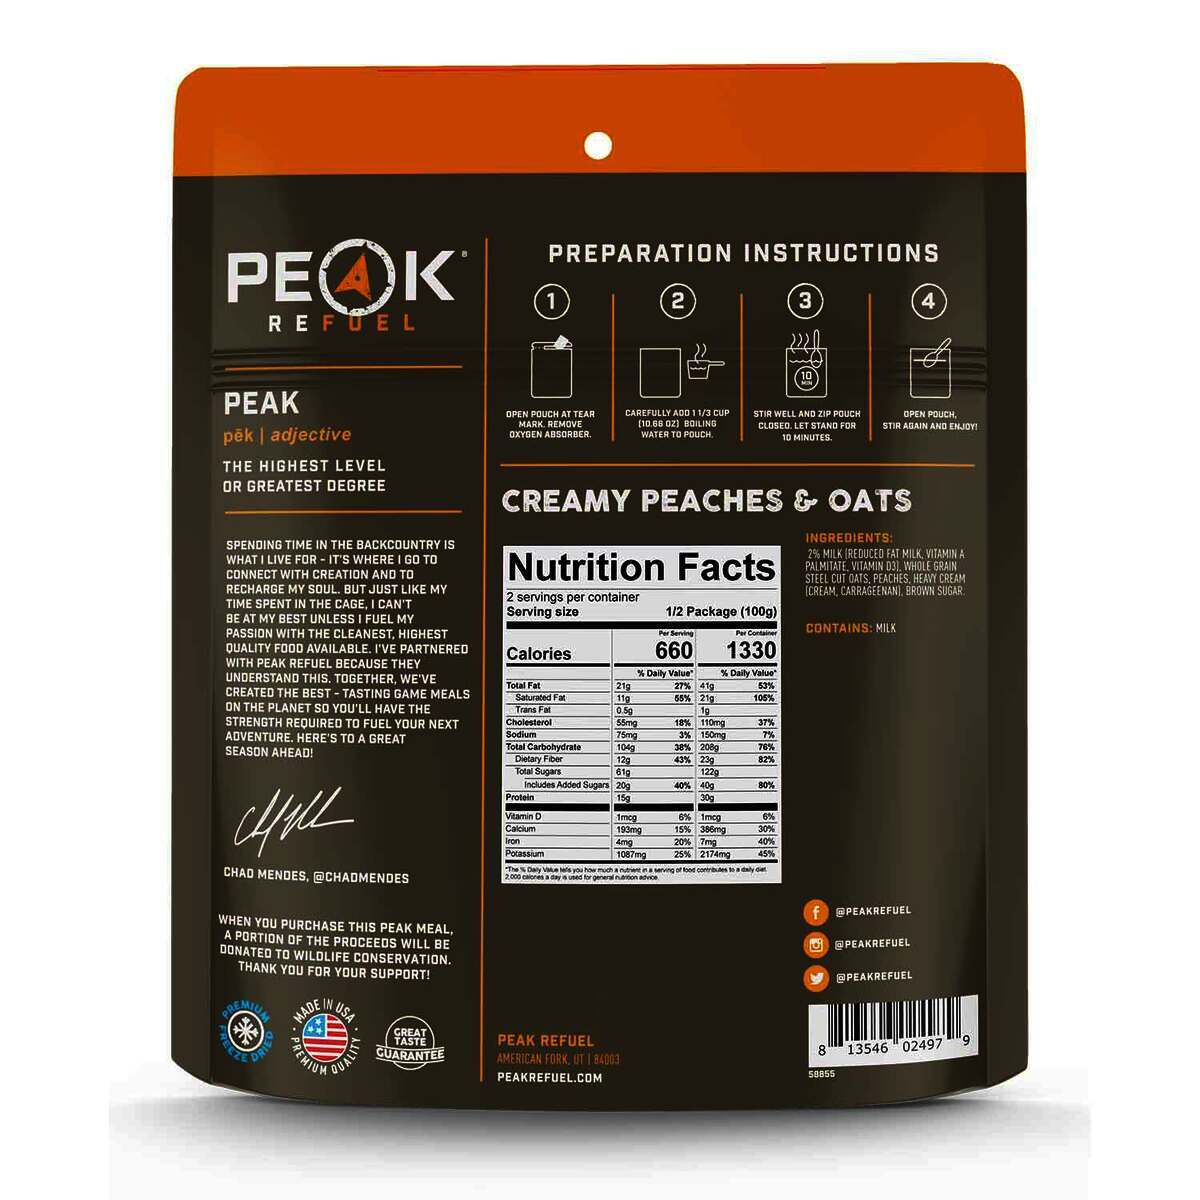 Peak Refuel Chad Mendes Signature Creamy Peaches & Steal Cut Oats Freeze Dried Food 7.05 oz Prepared Meals & Entrées Brewing America 